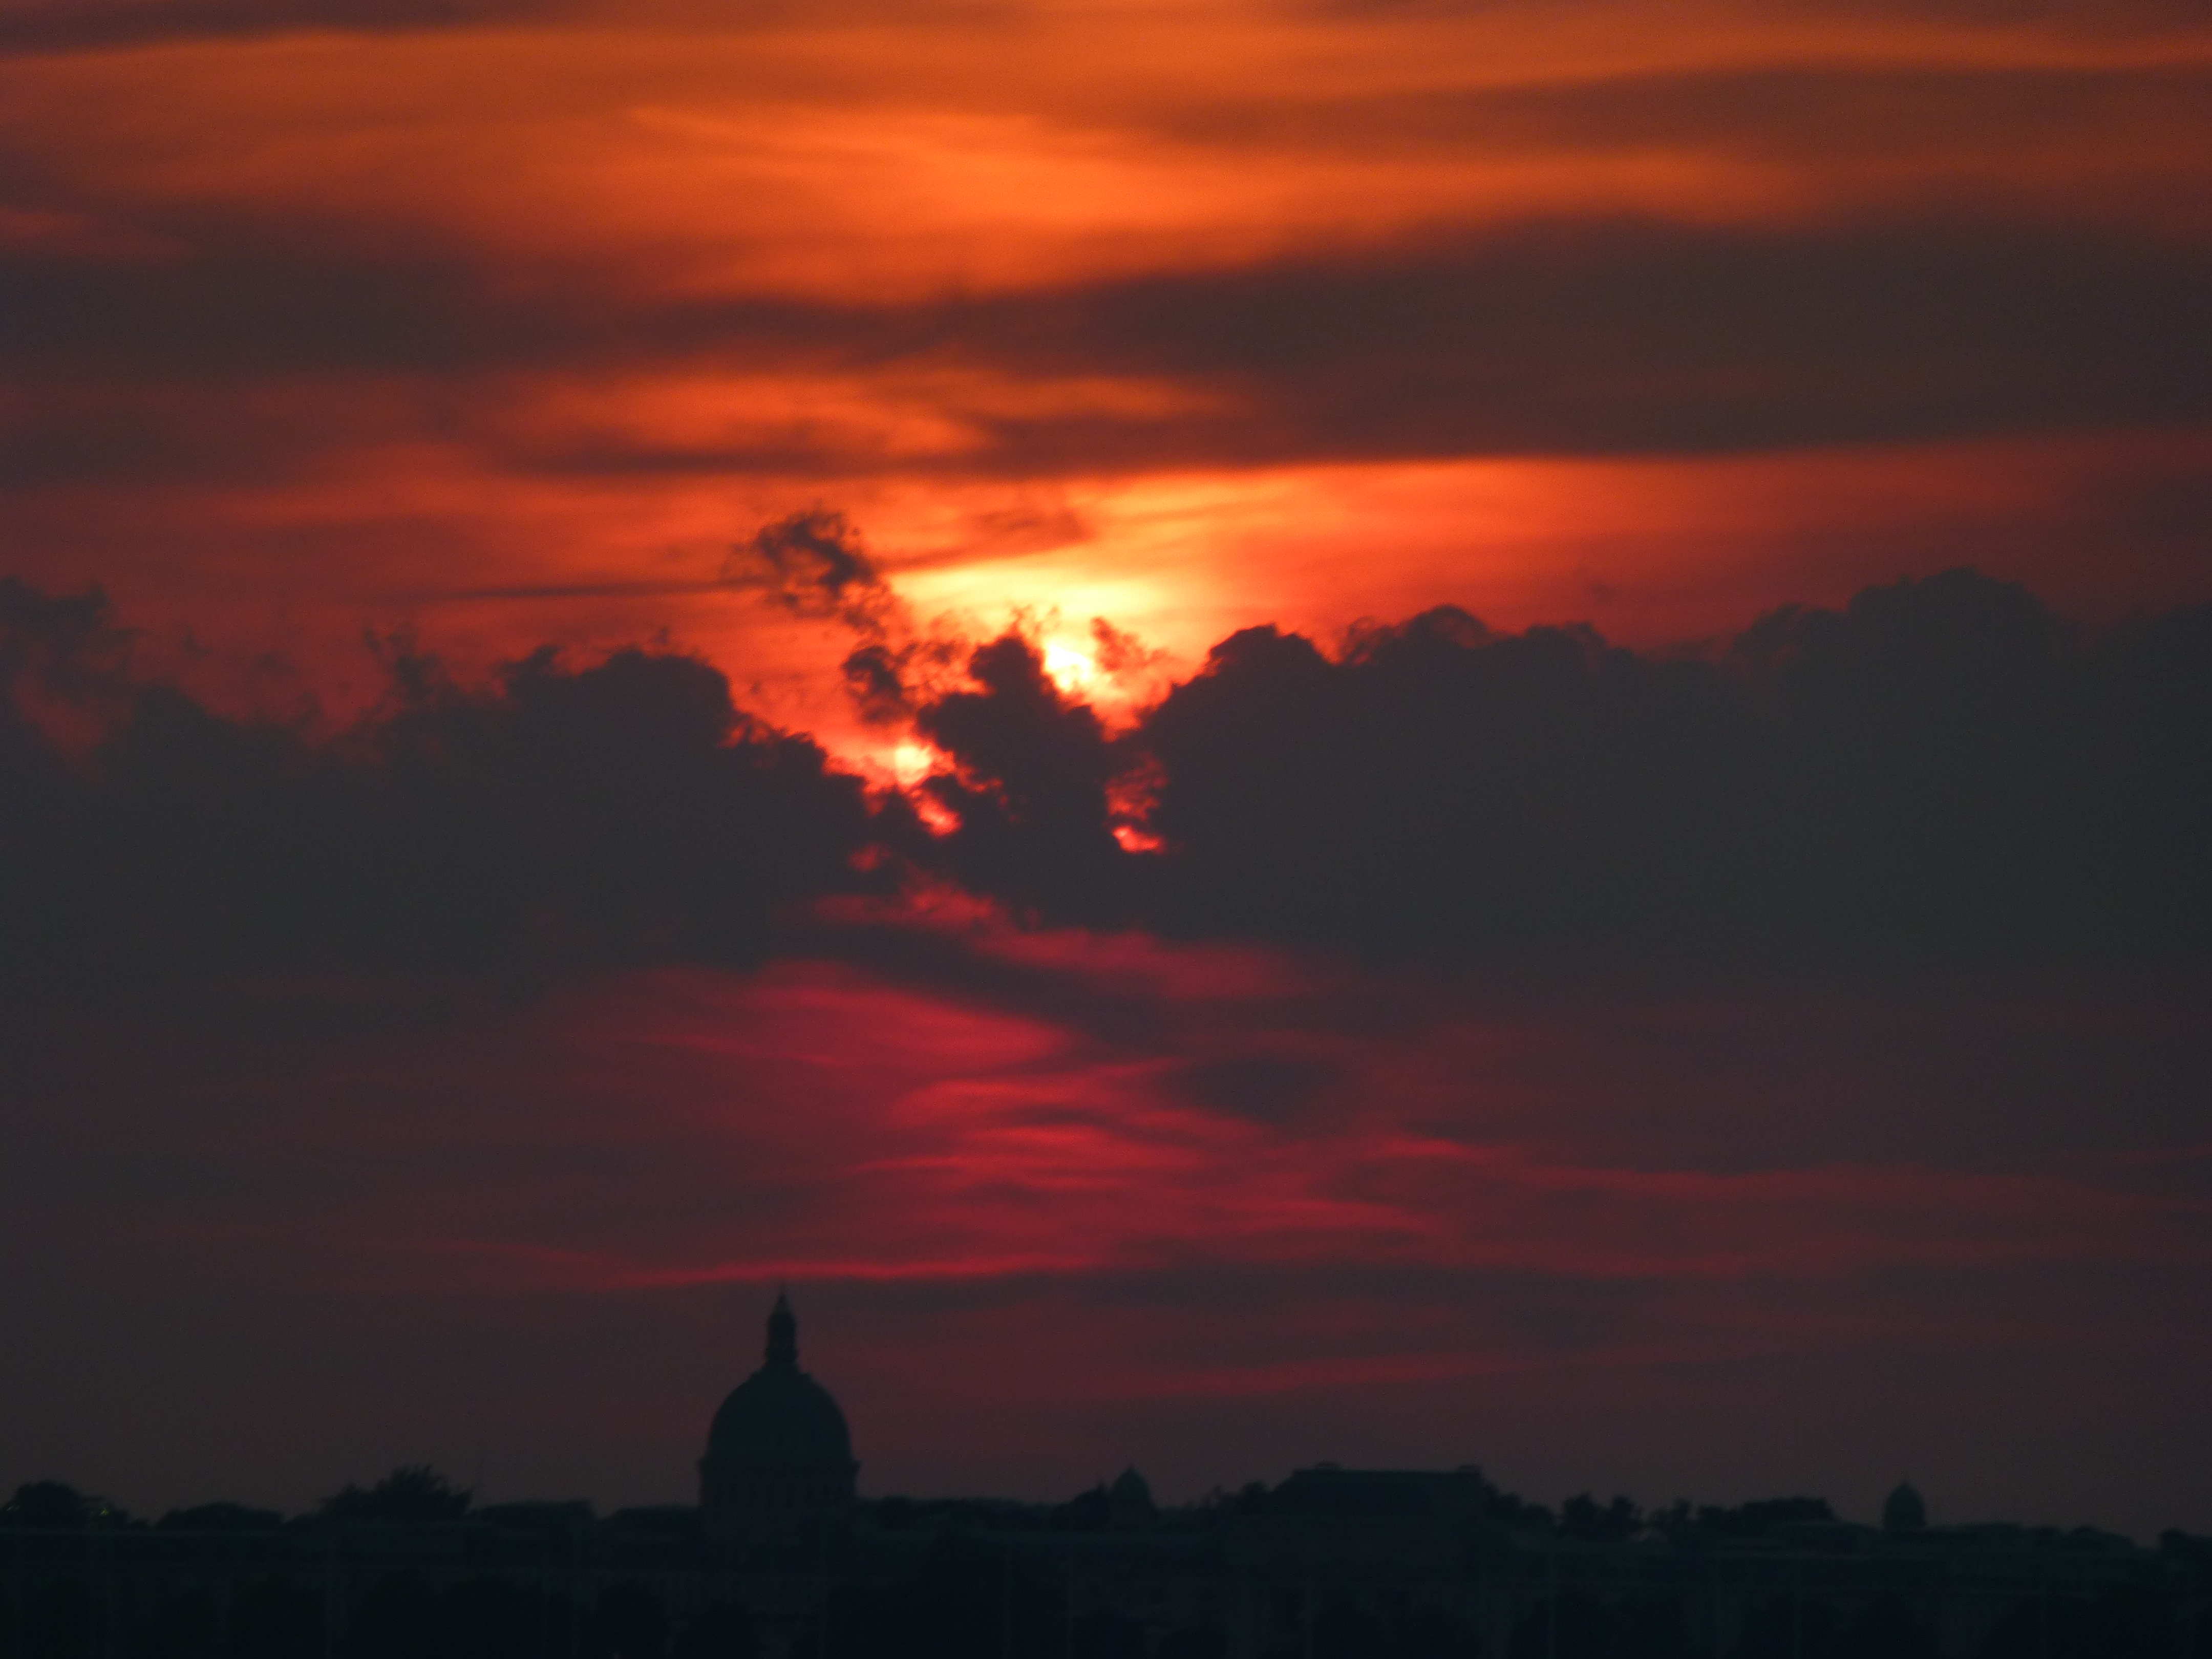 Raging red cloudy sunset over the USNA Chapel Dome